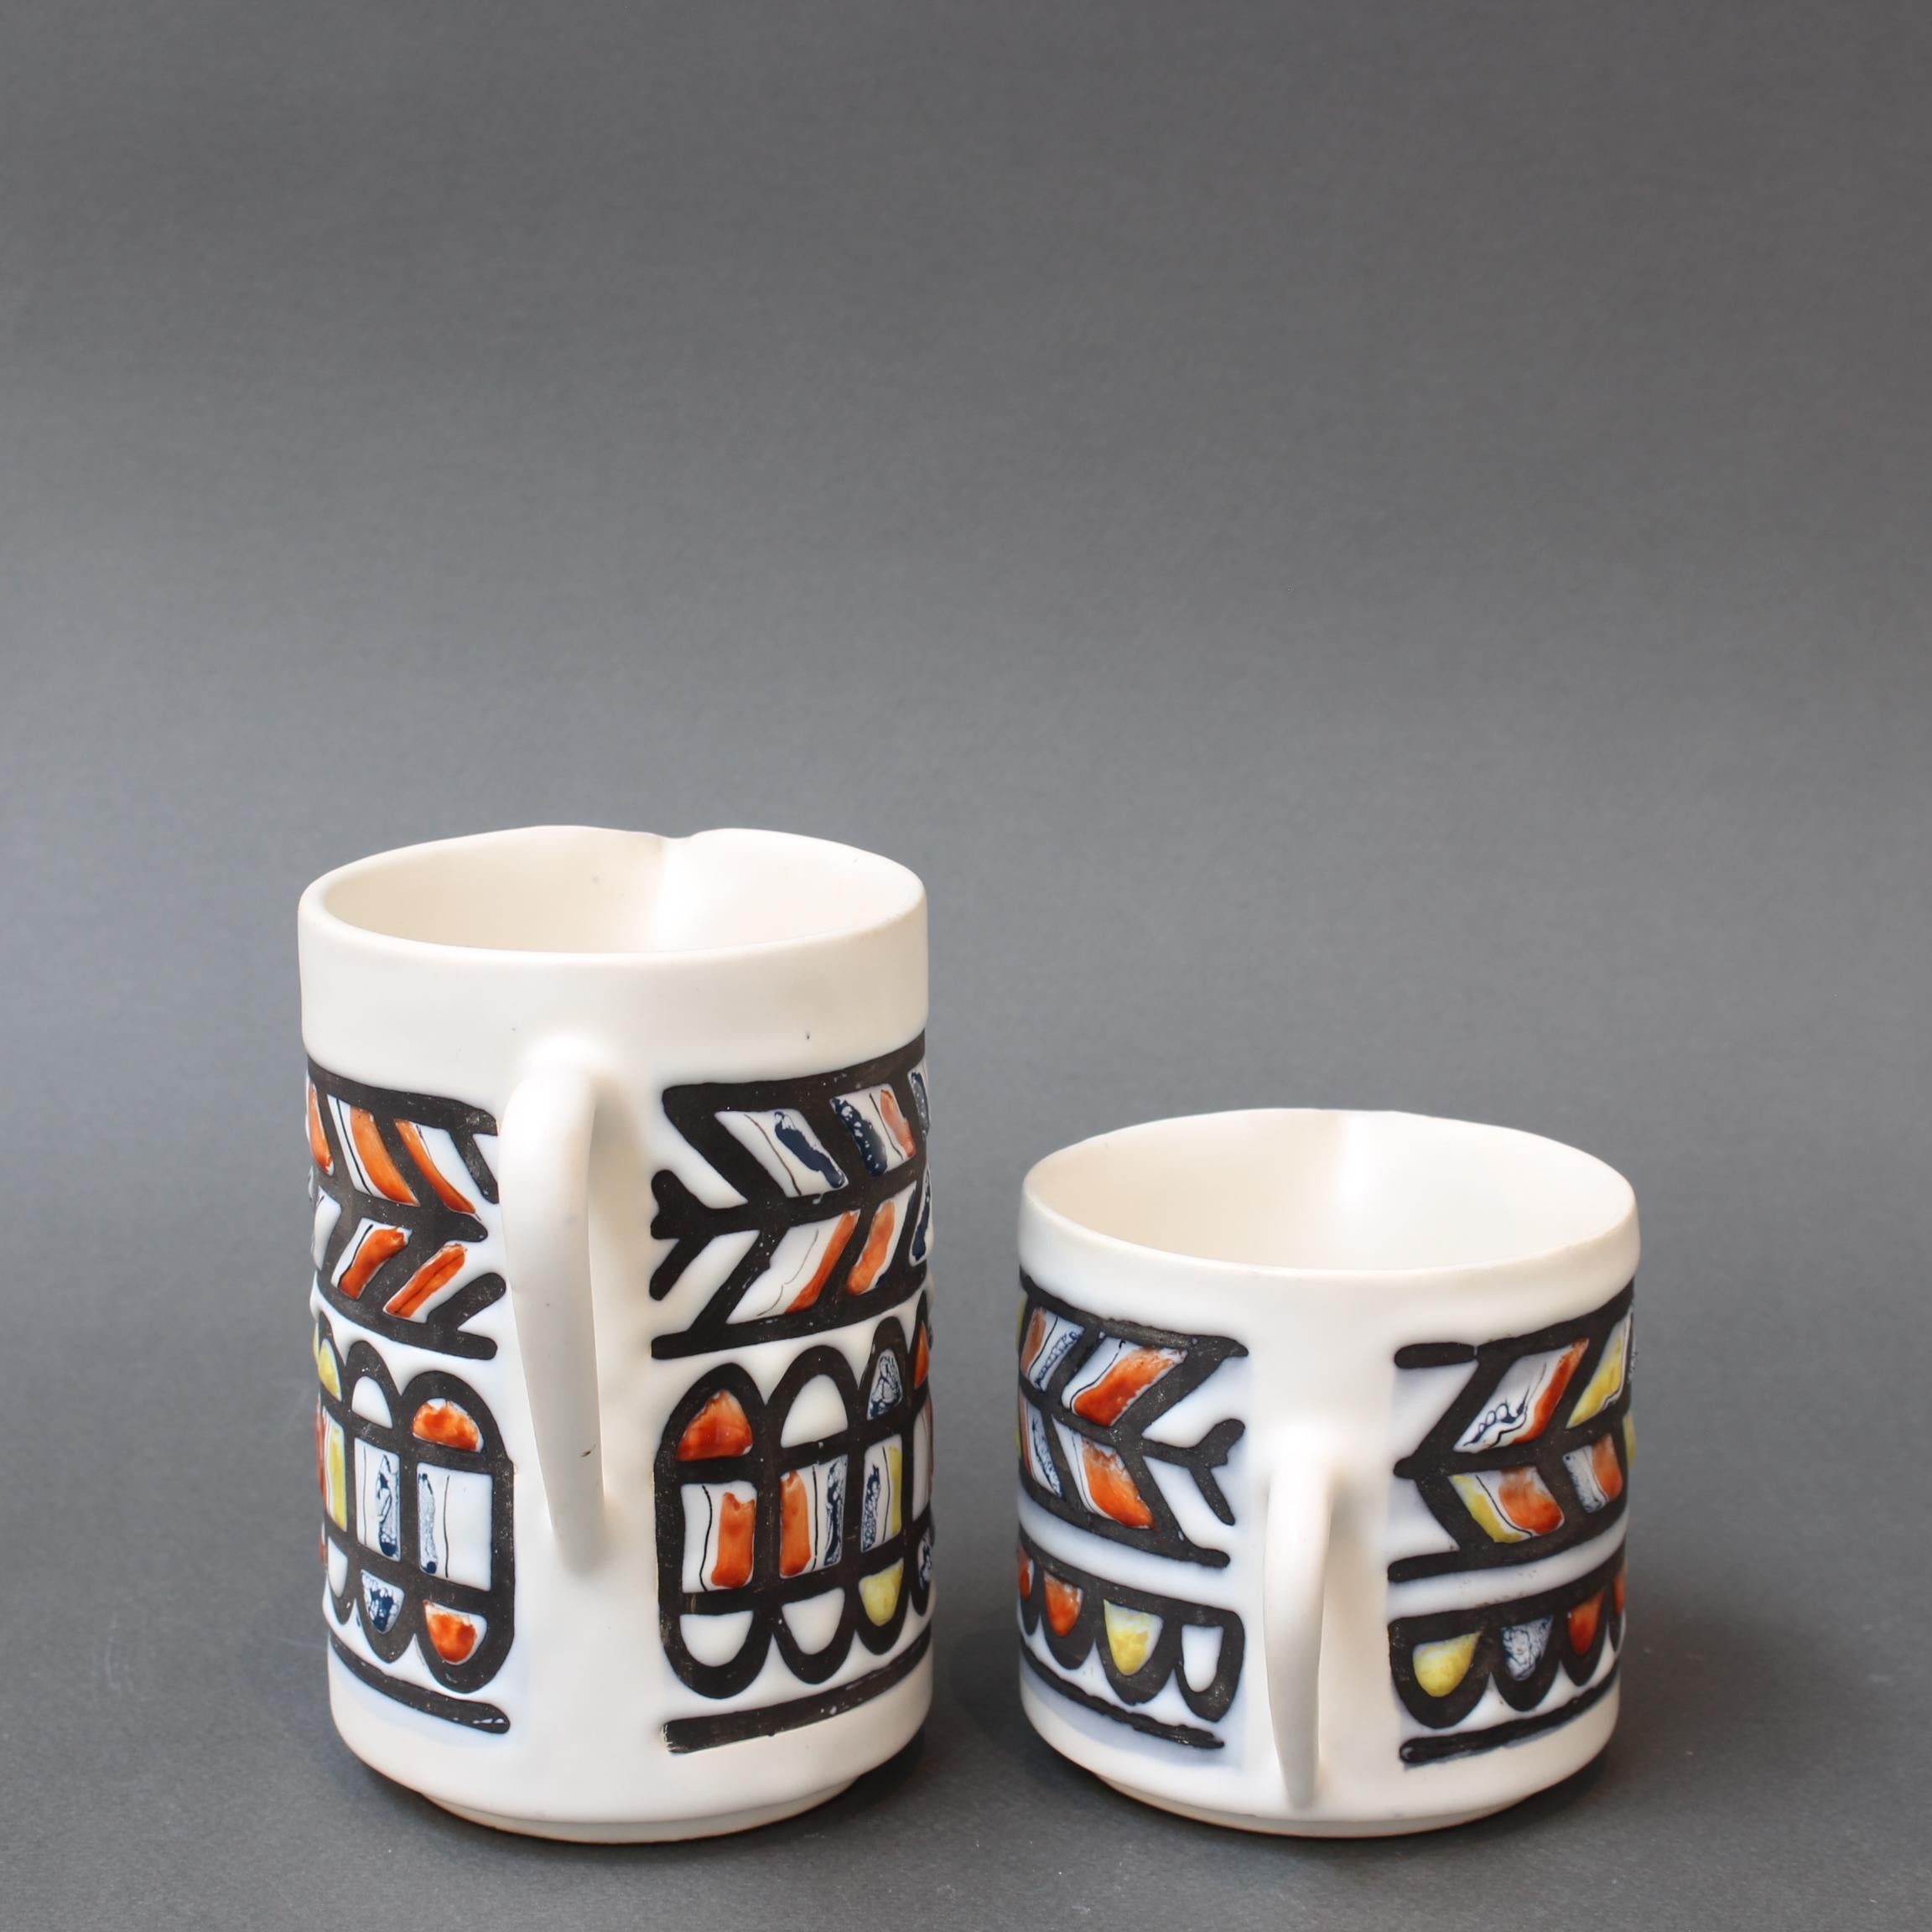 Vintage French Ceramic Set of Vessels by Roger Capron (circa 1960s) In Good Condition For Sale In London, GB